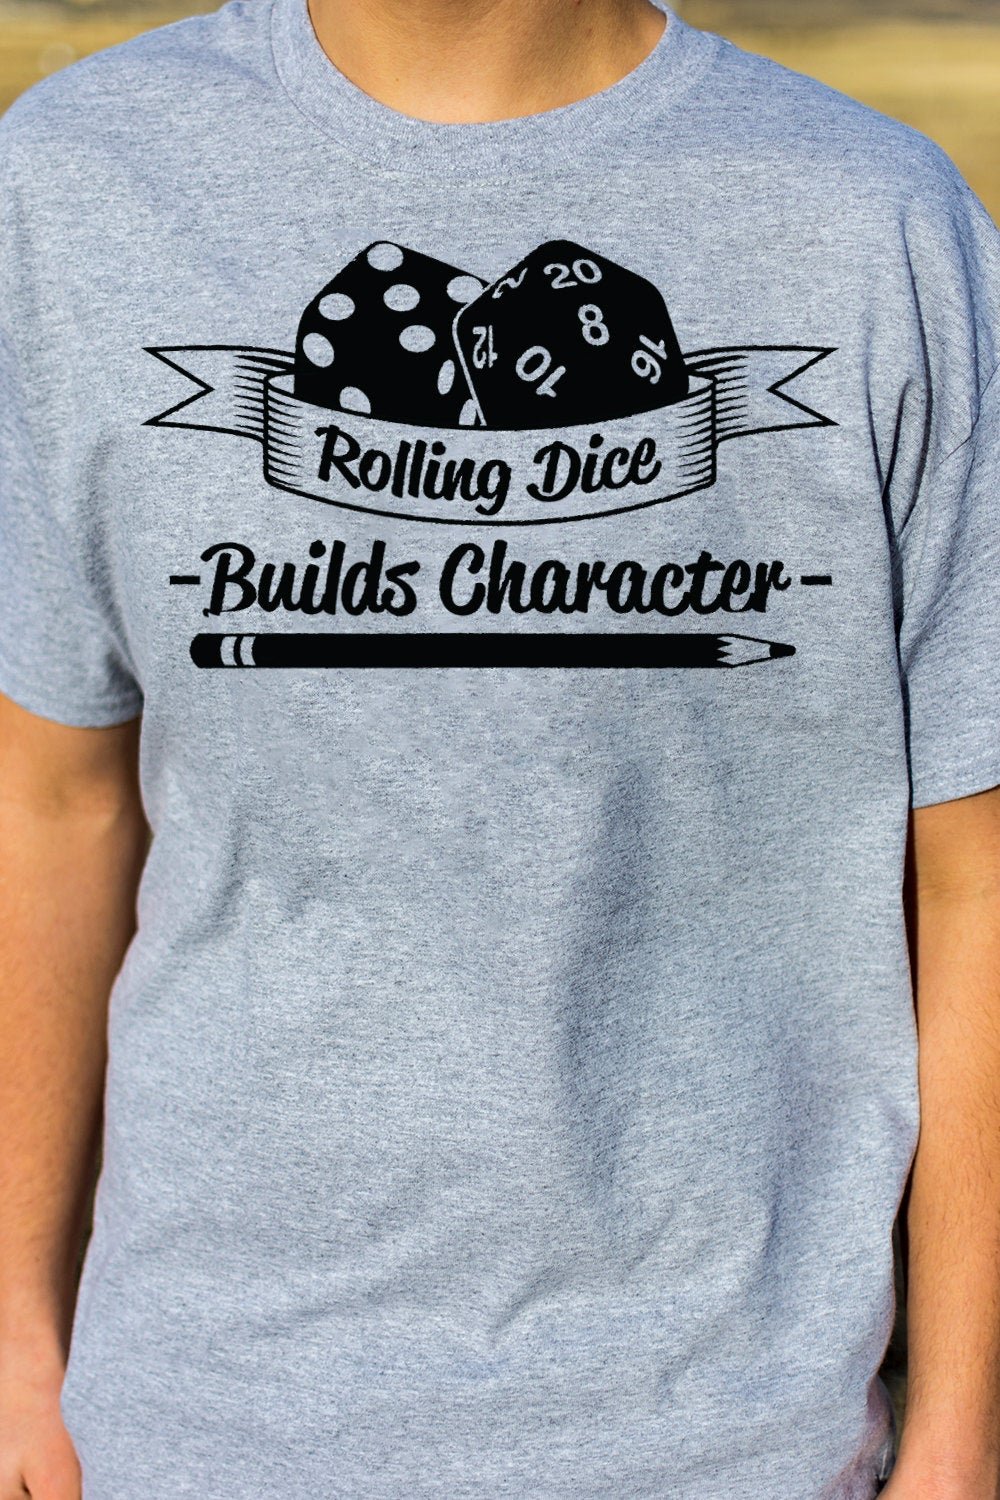 Rolling Dice Builds Character T-Shirt  Level 1 Gamers   